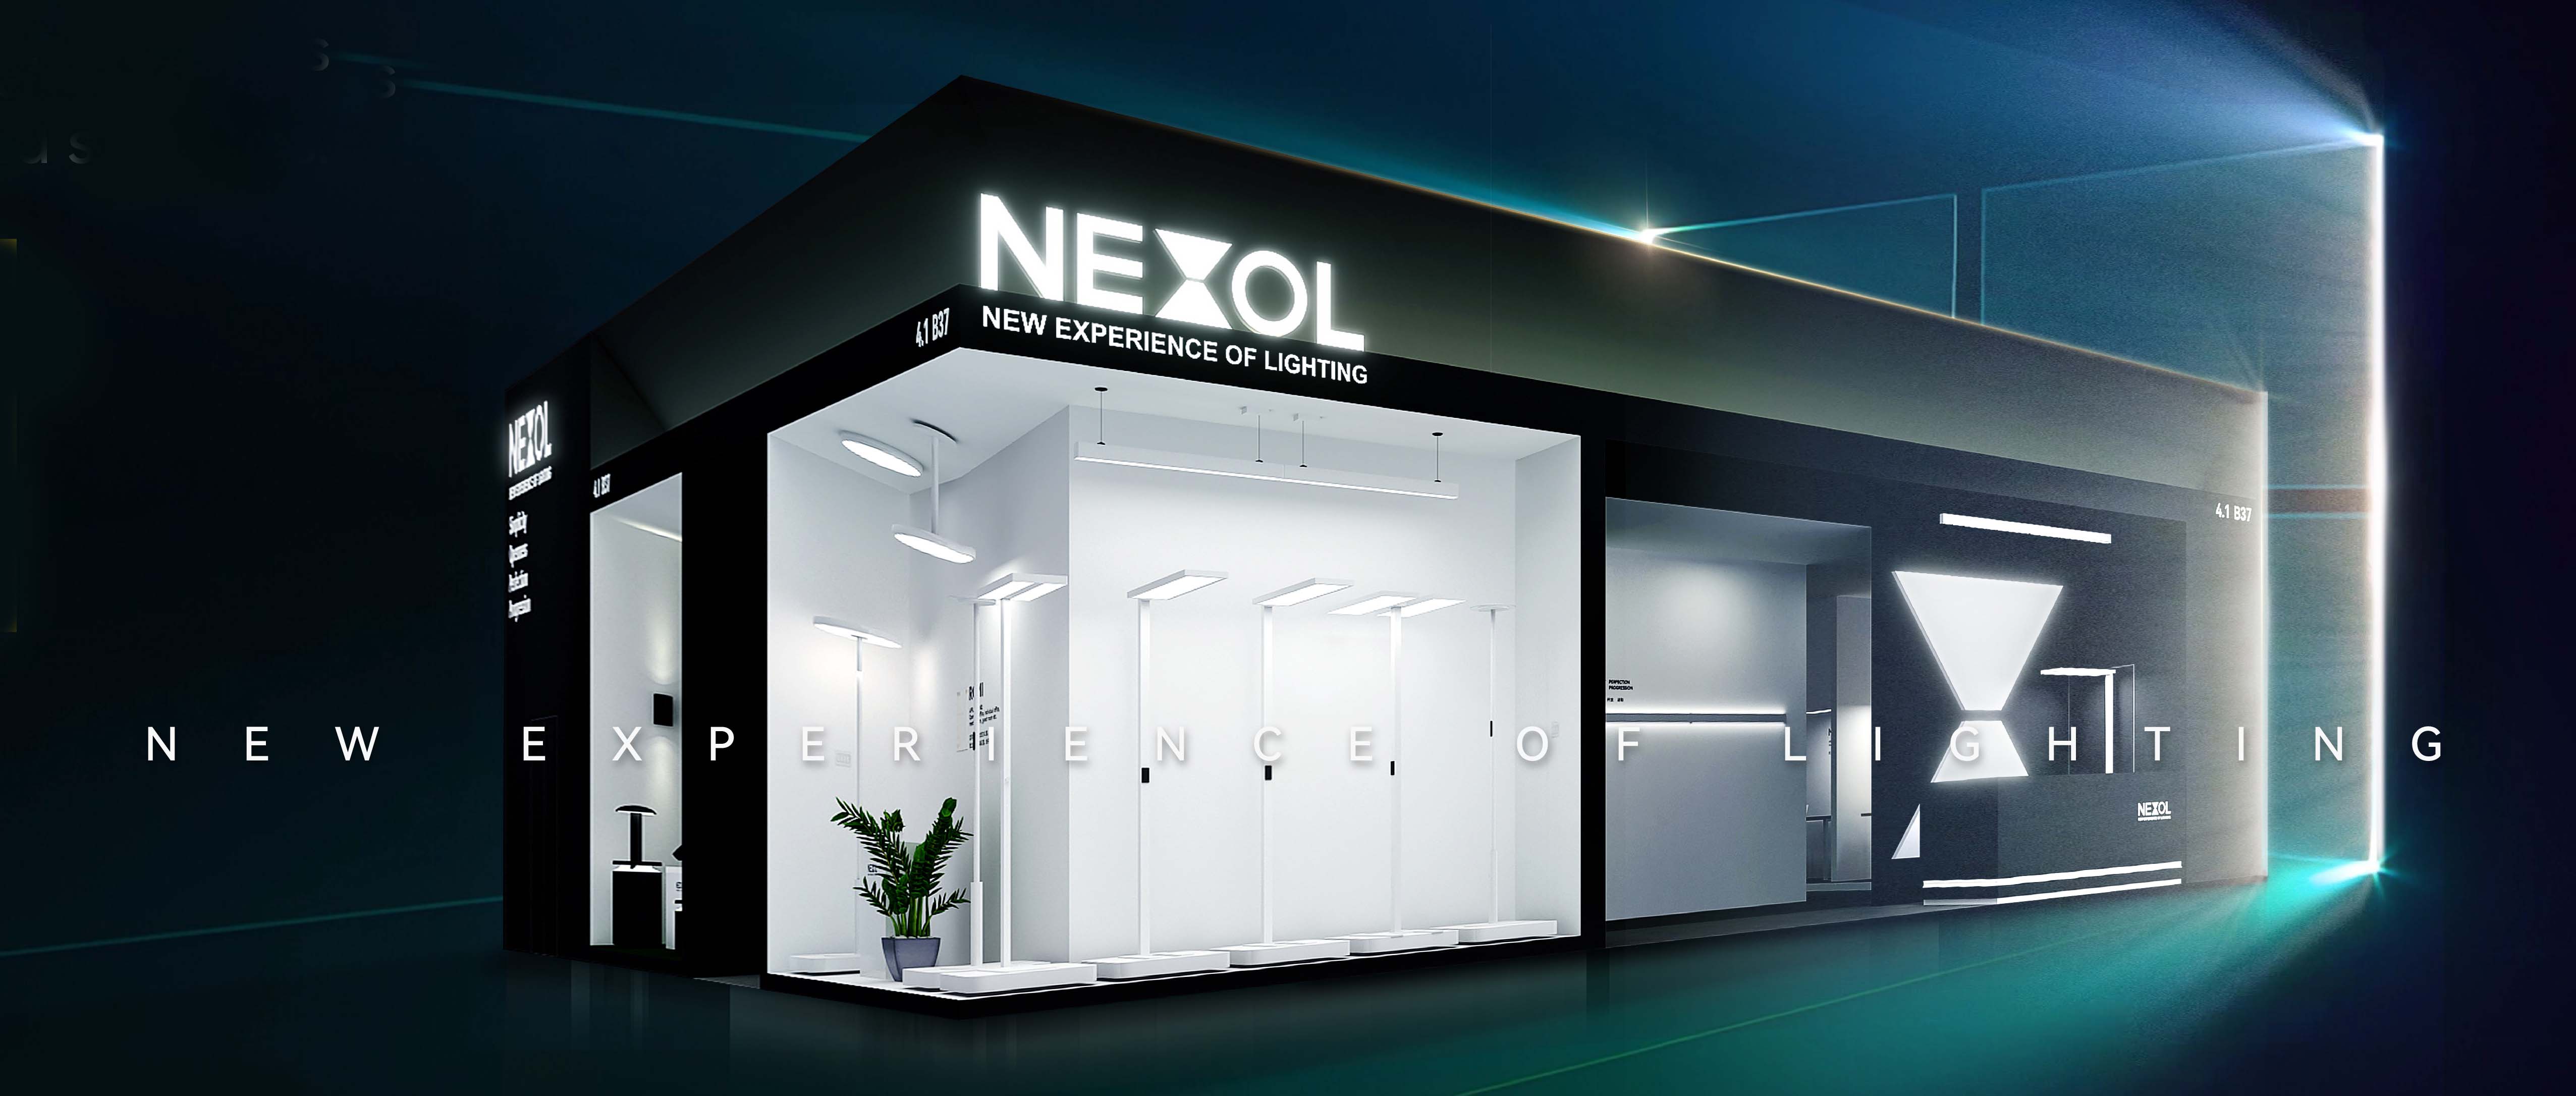 NEXOL Lighting｜Successful Conclusion of GILE 2024, Looking Forward to Seeing You Again!